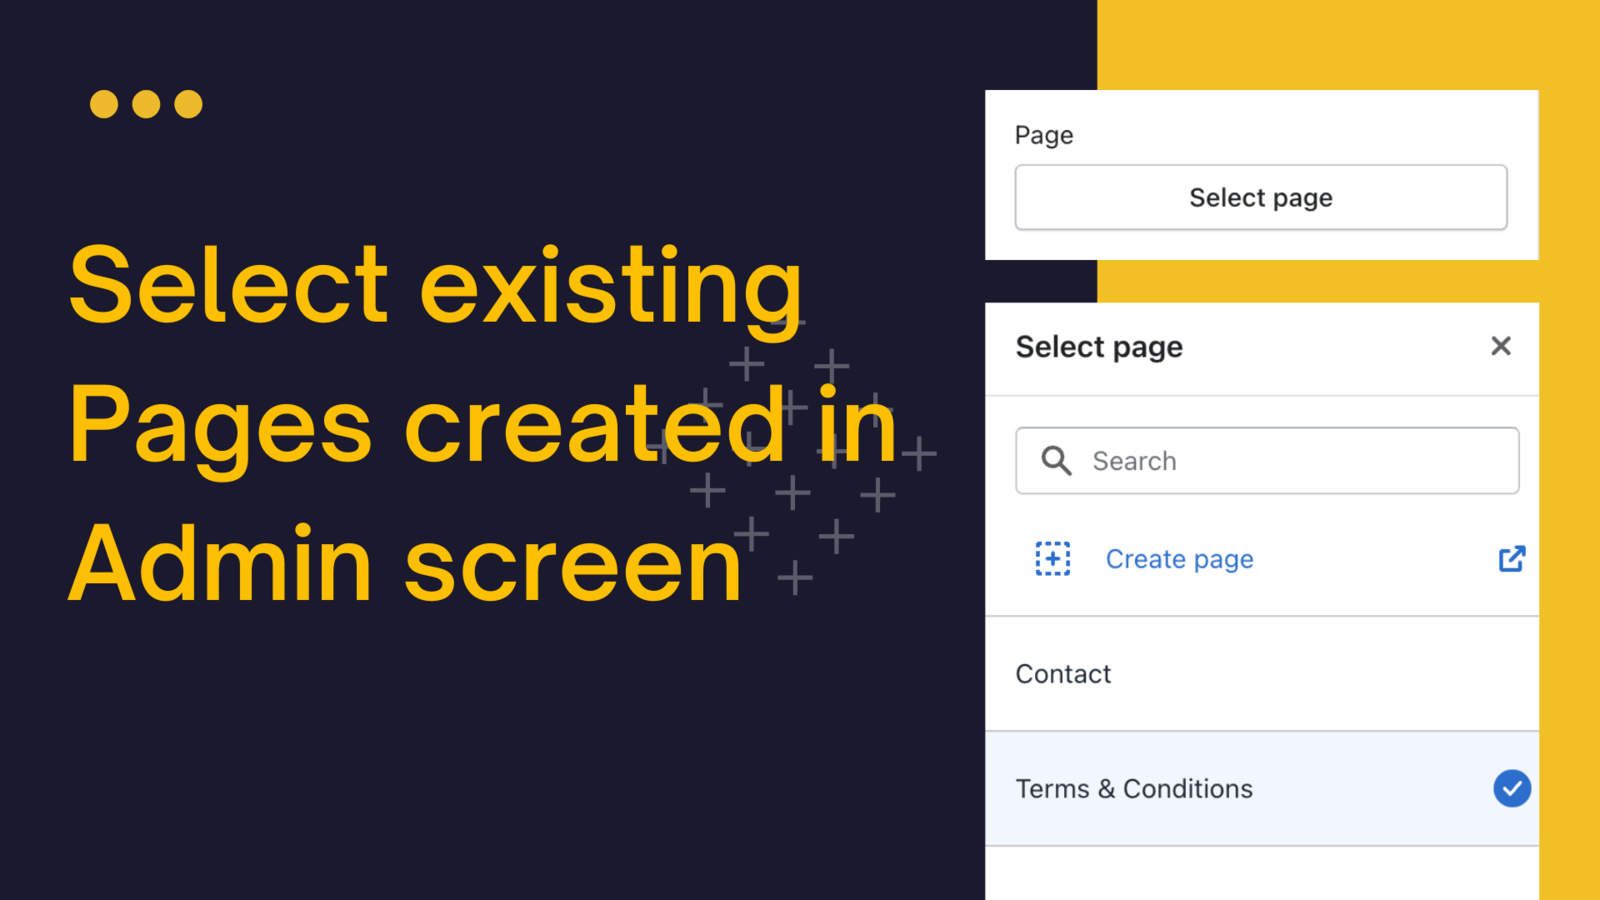 Select pages created using Shopify admin